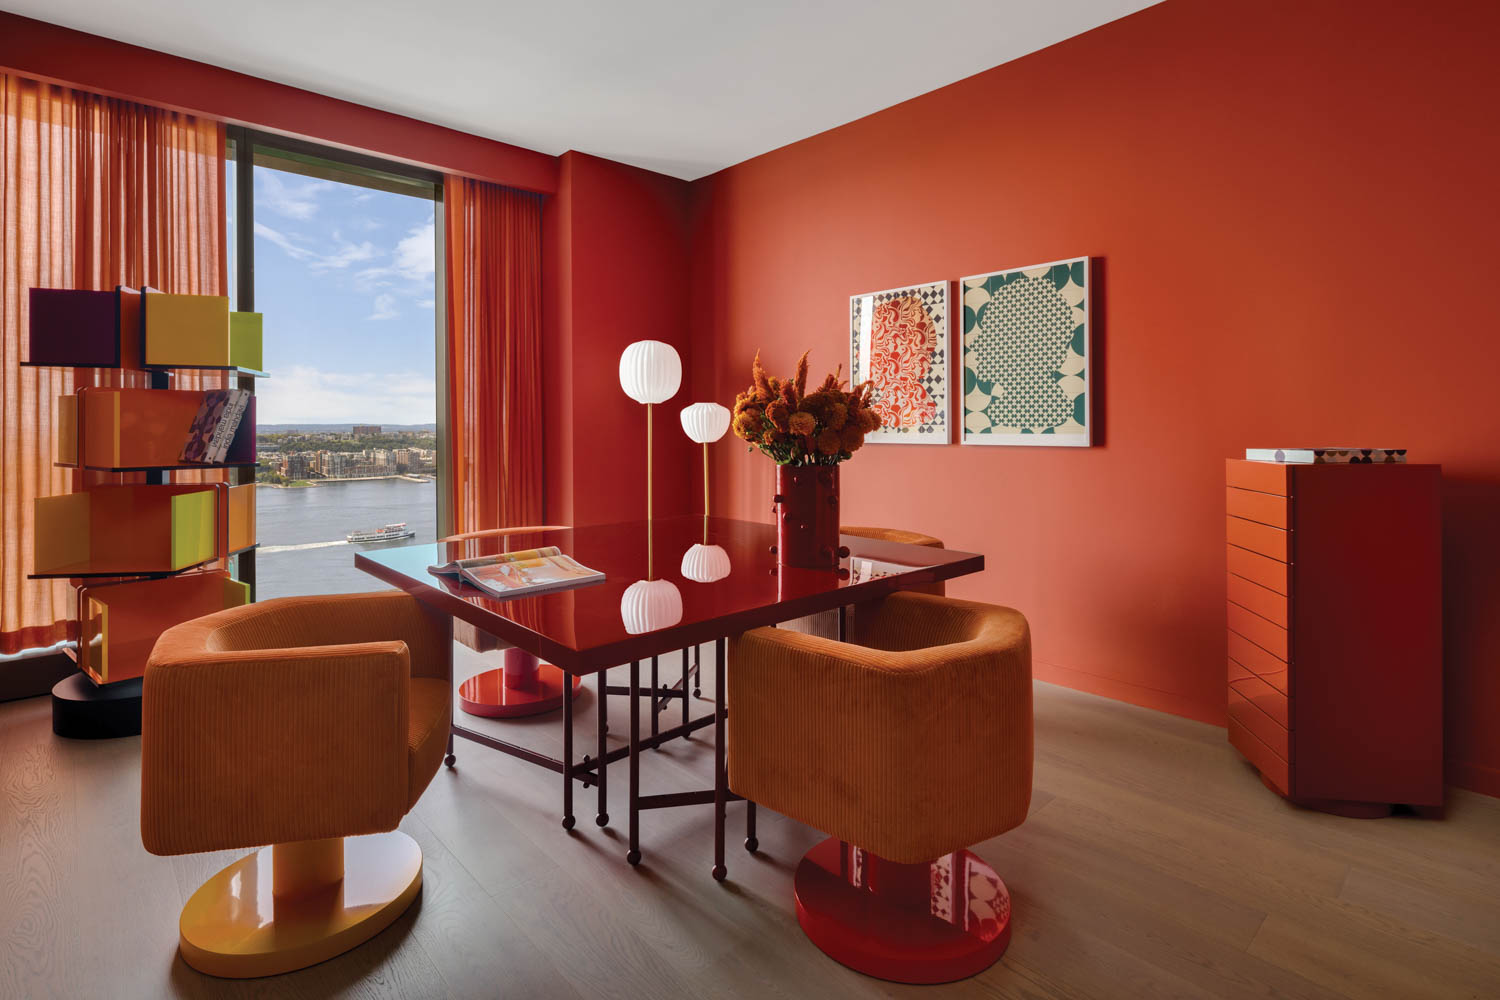 A home office with orange walls and orange chairs around a glass table